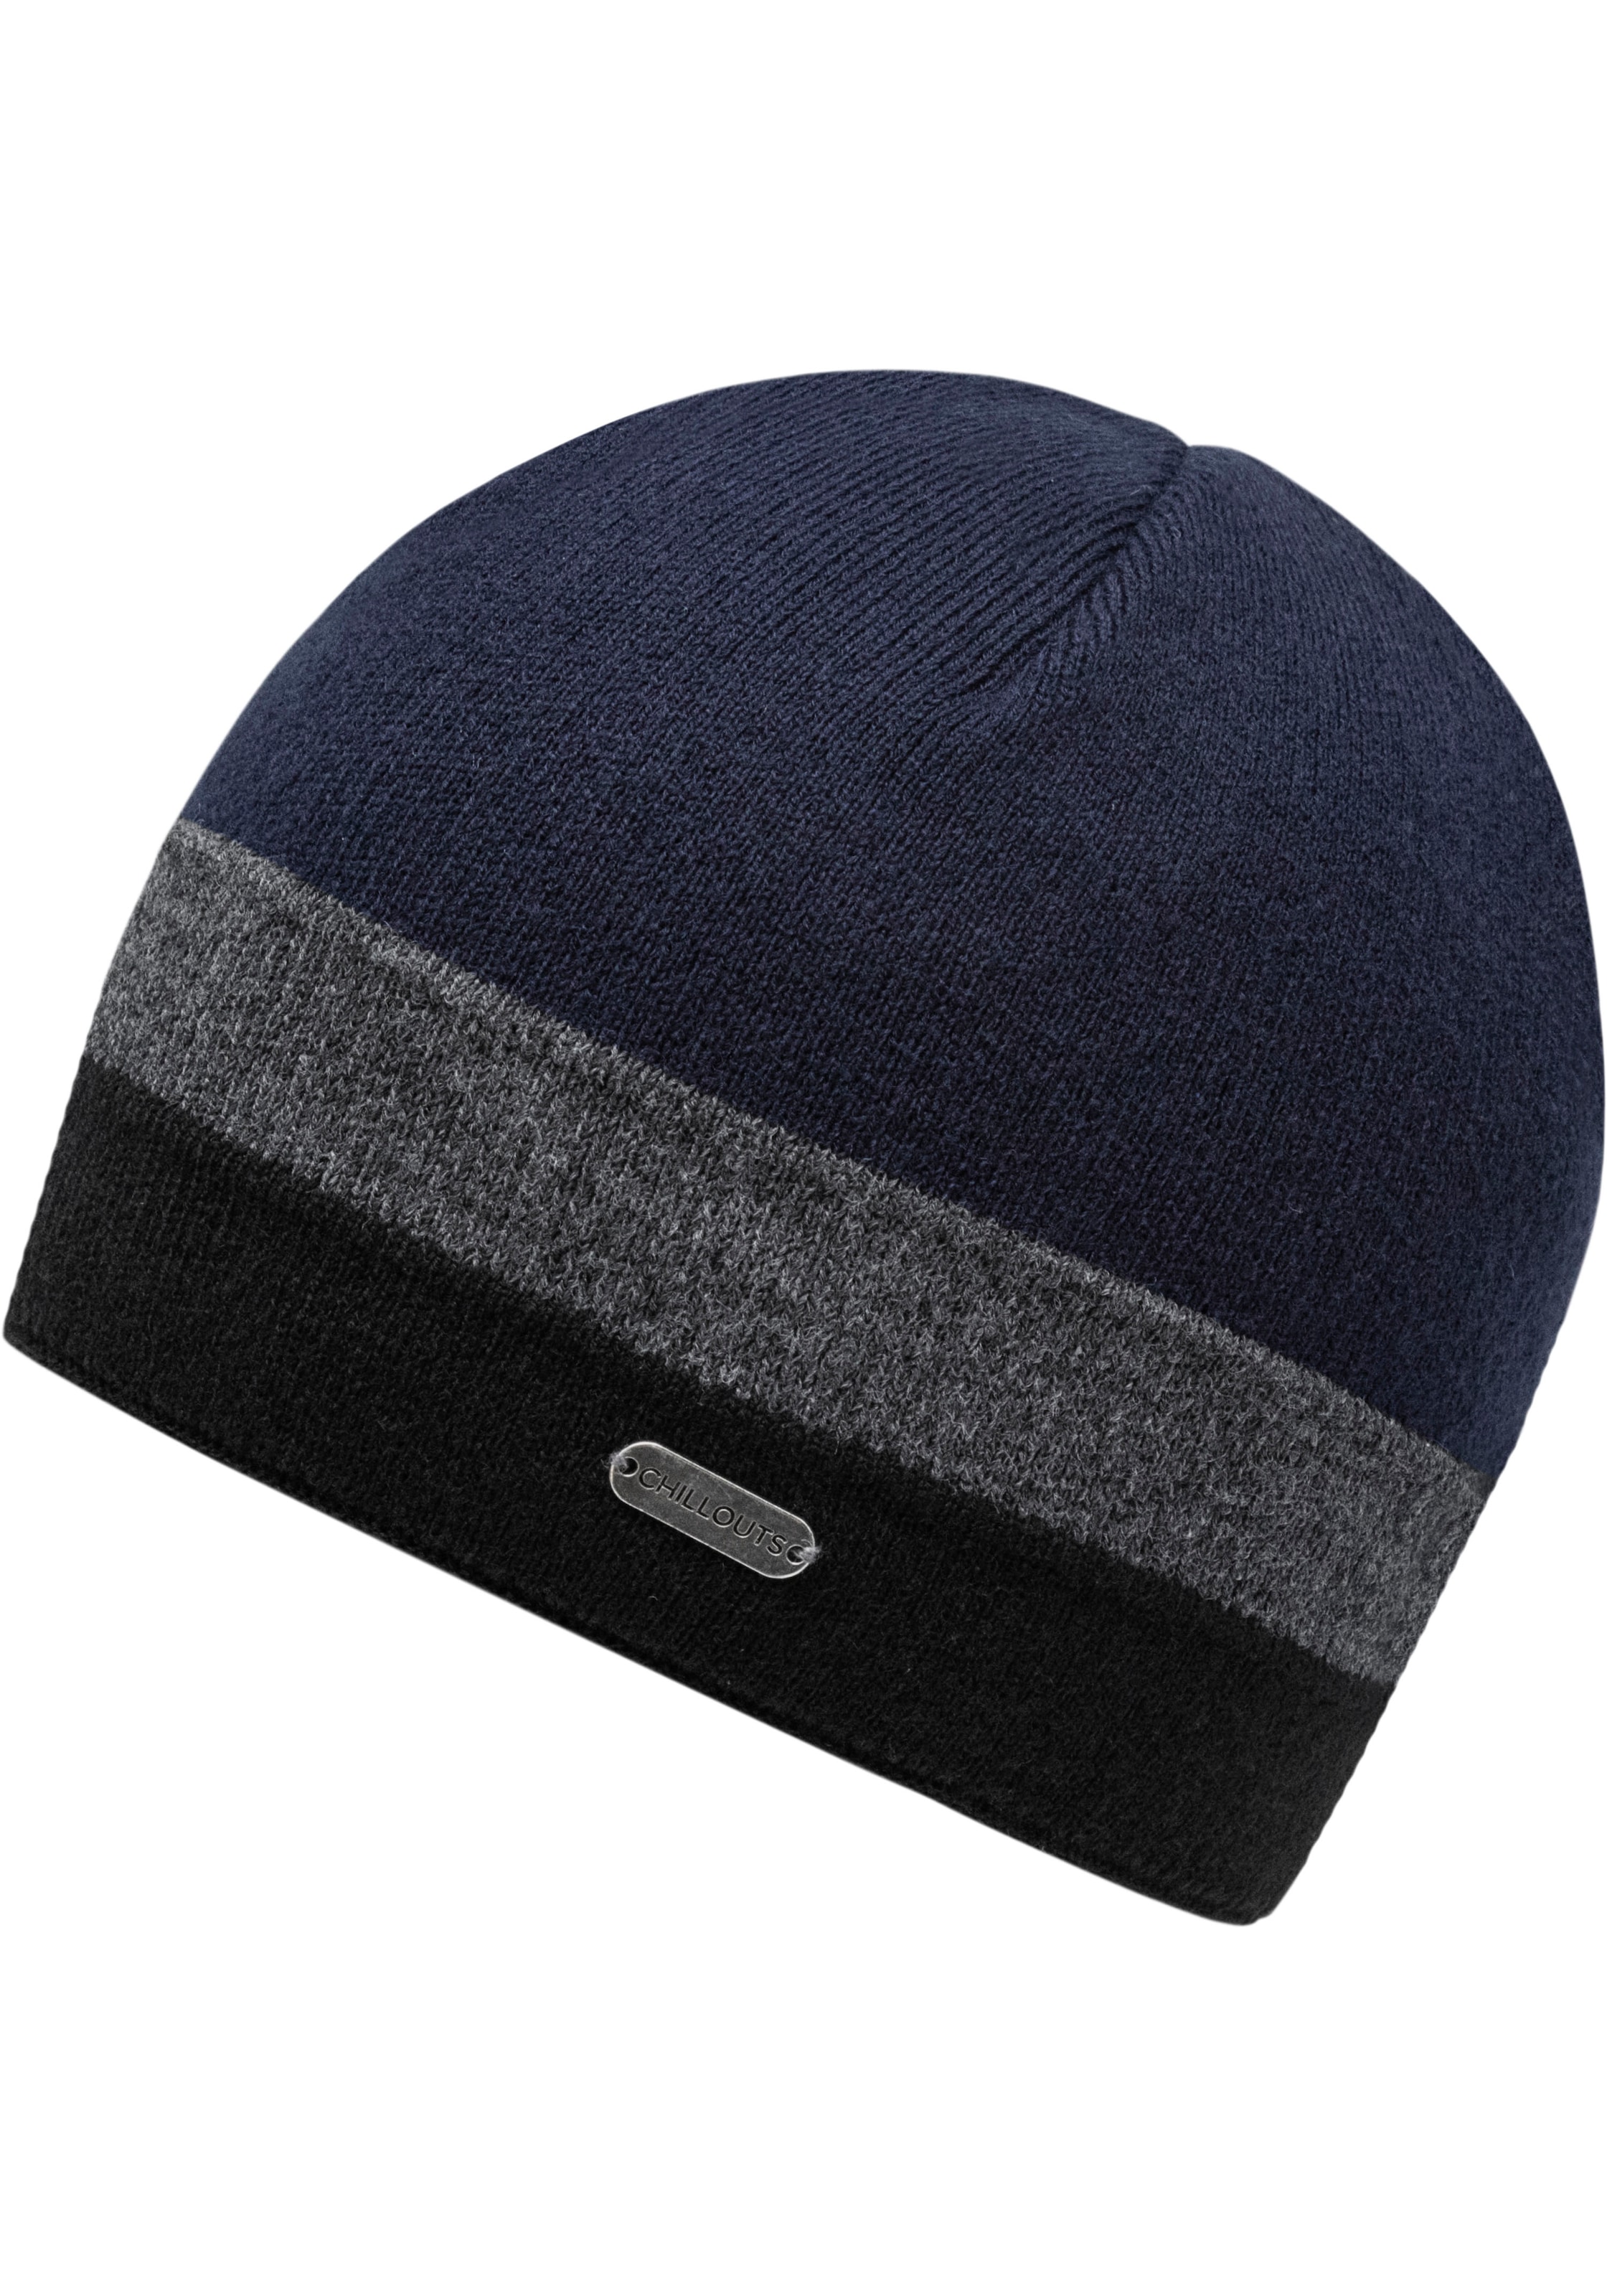 Johnny Beanie | Hat«, Hat chillouts »Johnny UNIVERSAL kaufen online